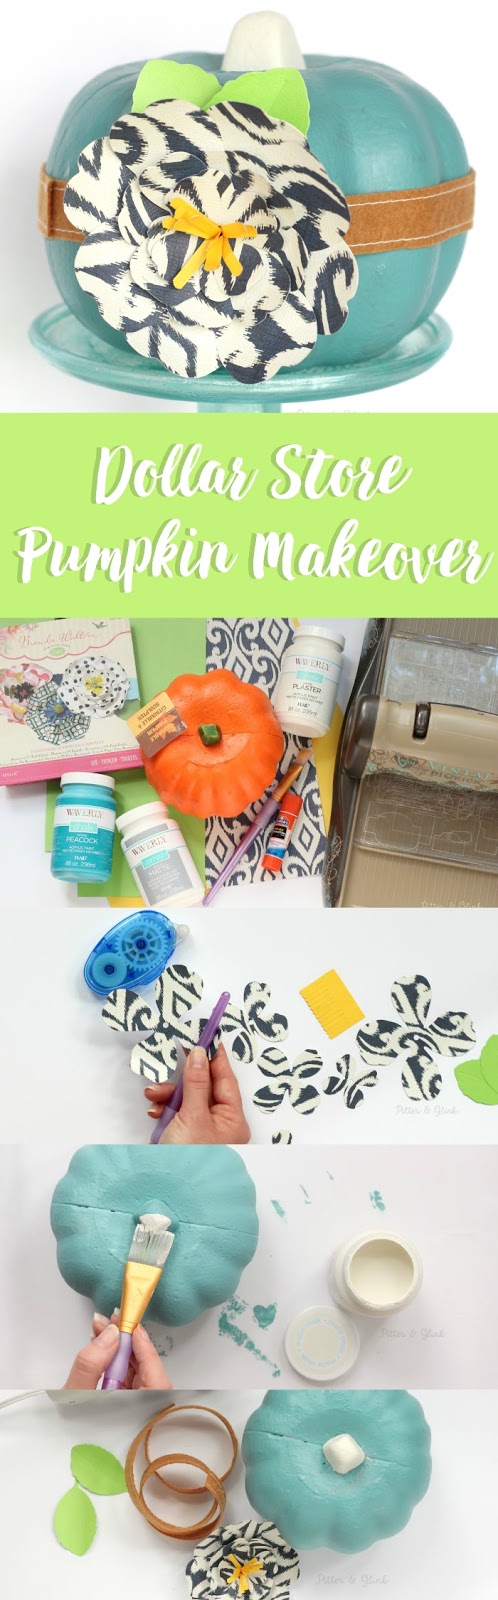 Take a dollar store pumpkin from cheap to chic using paint and a handmade paper flower. www.pitterandglink.com